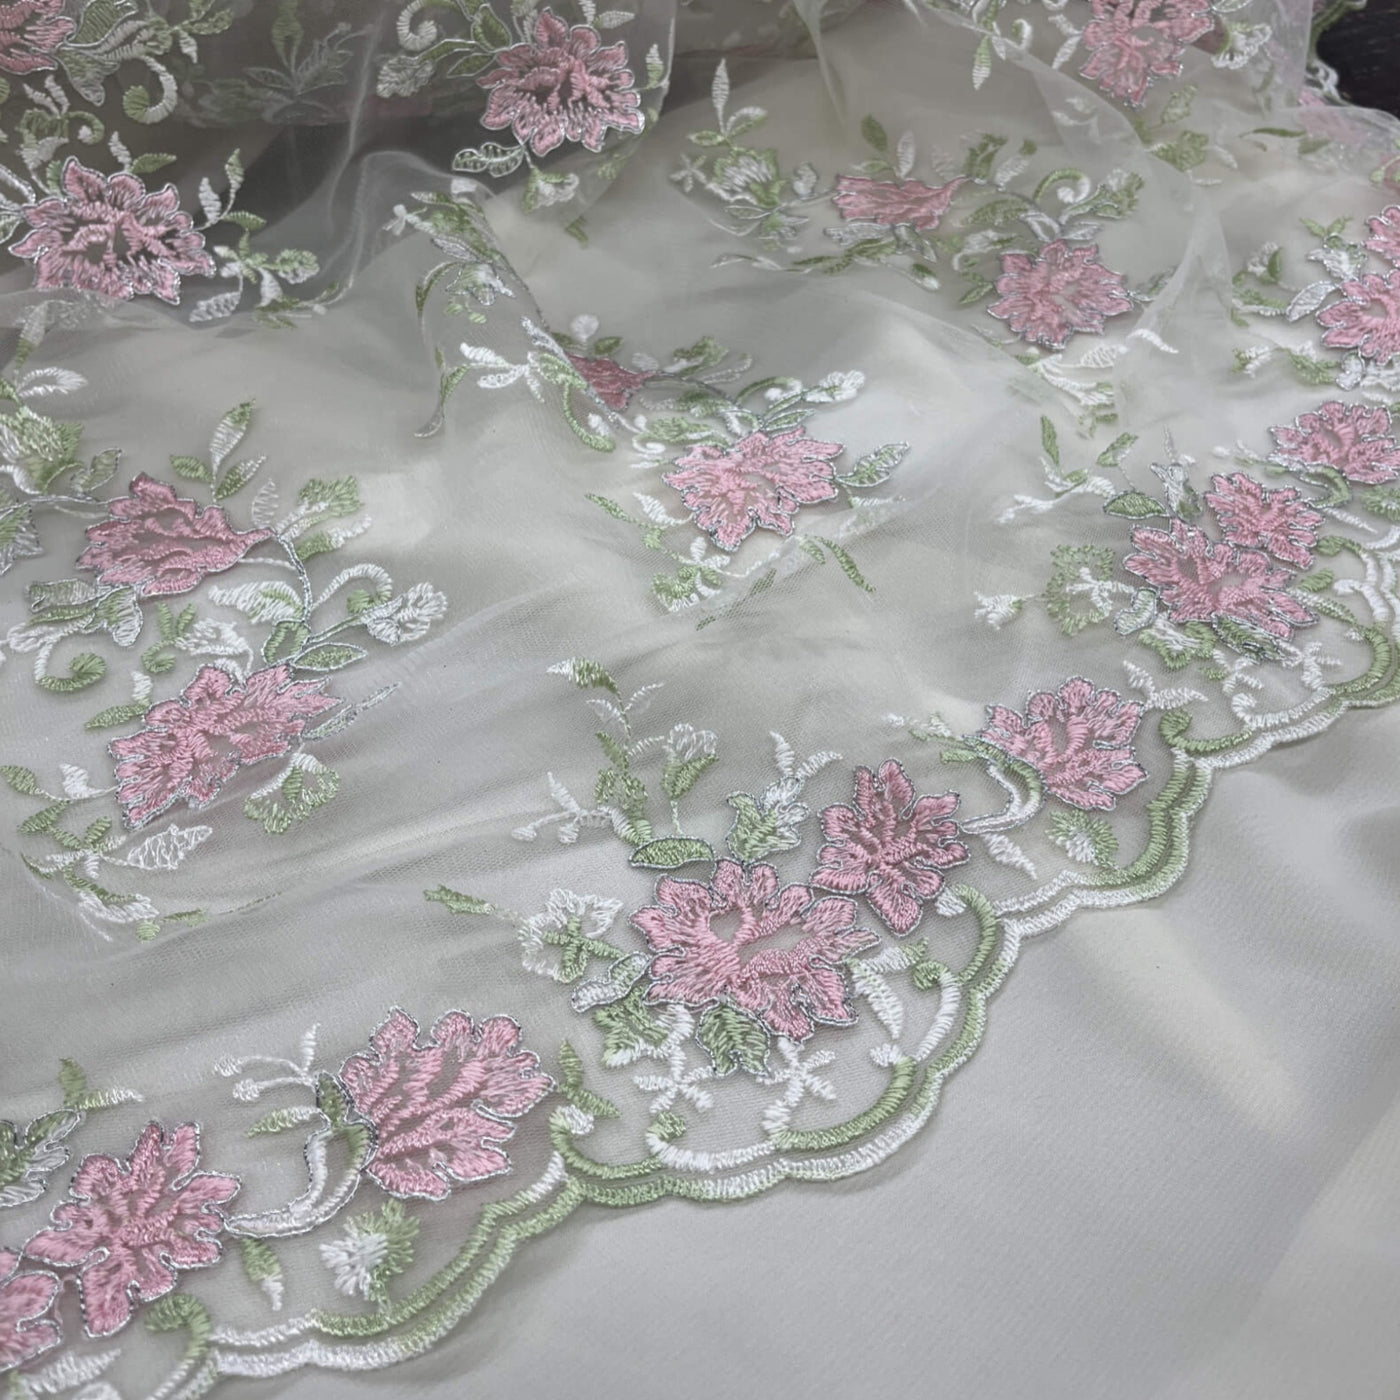 Corded Bridal Lace Fabric Embroidered on 100% Polyester Net Mesh | Lace USA - 97154W